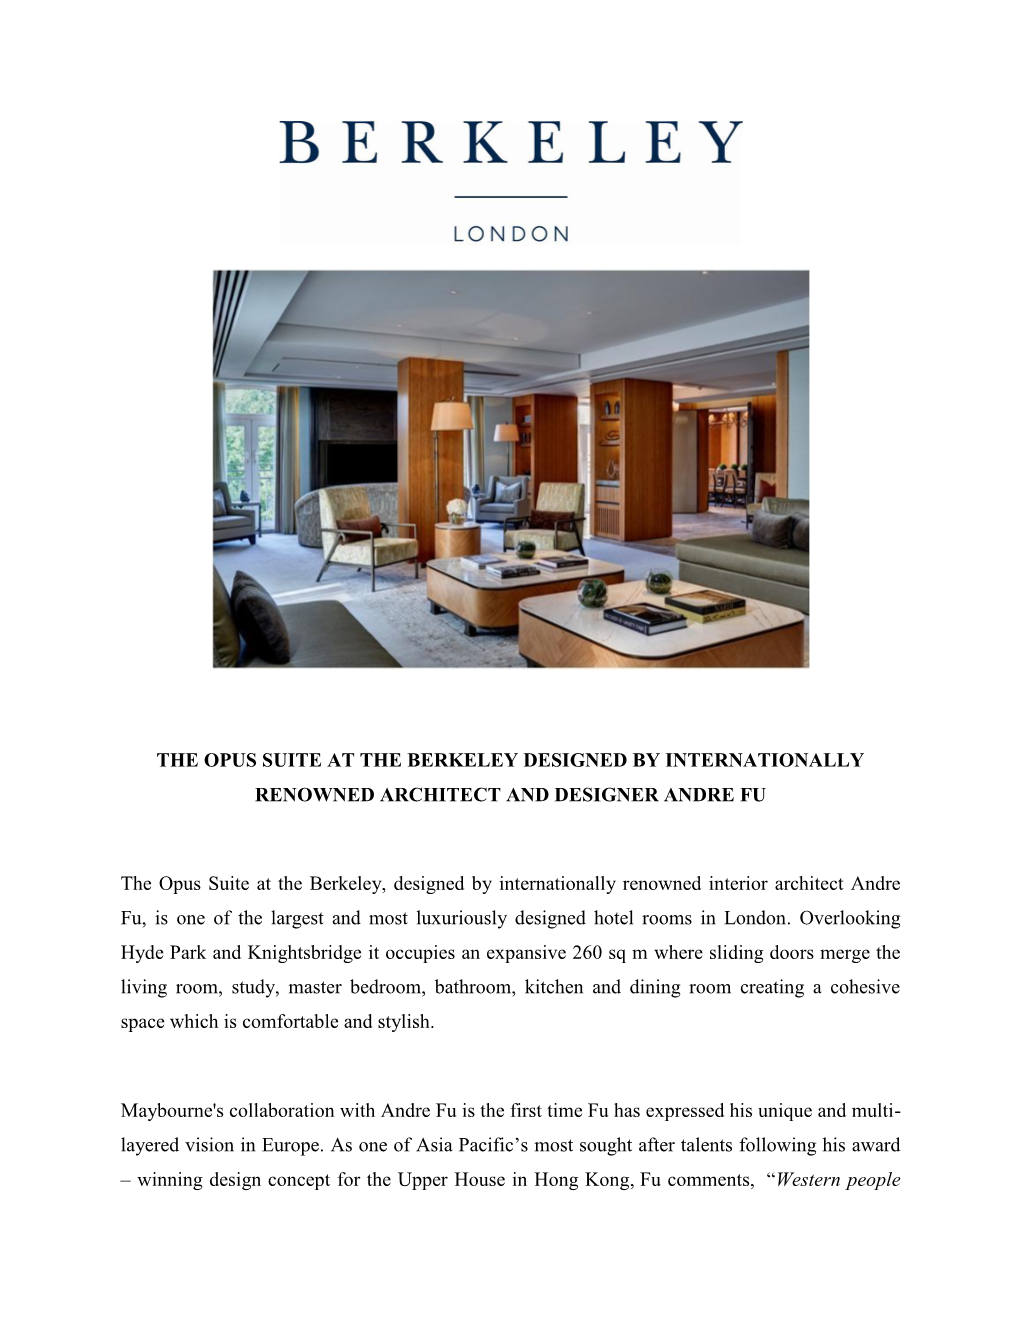 The Opus Suite at the Berkeley Designed by Internationally Renowned Architect and Designer Andre Fu